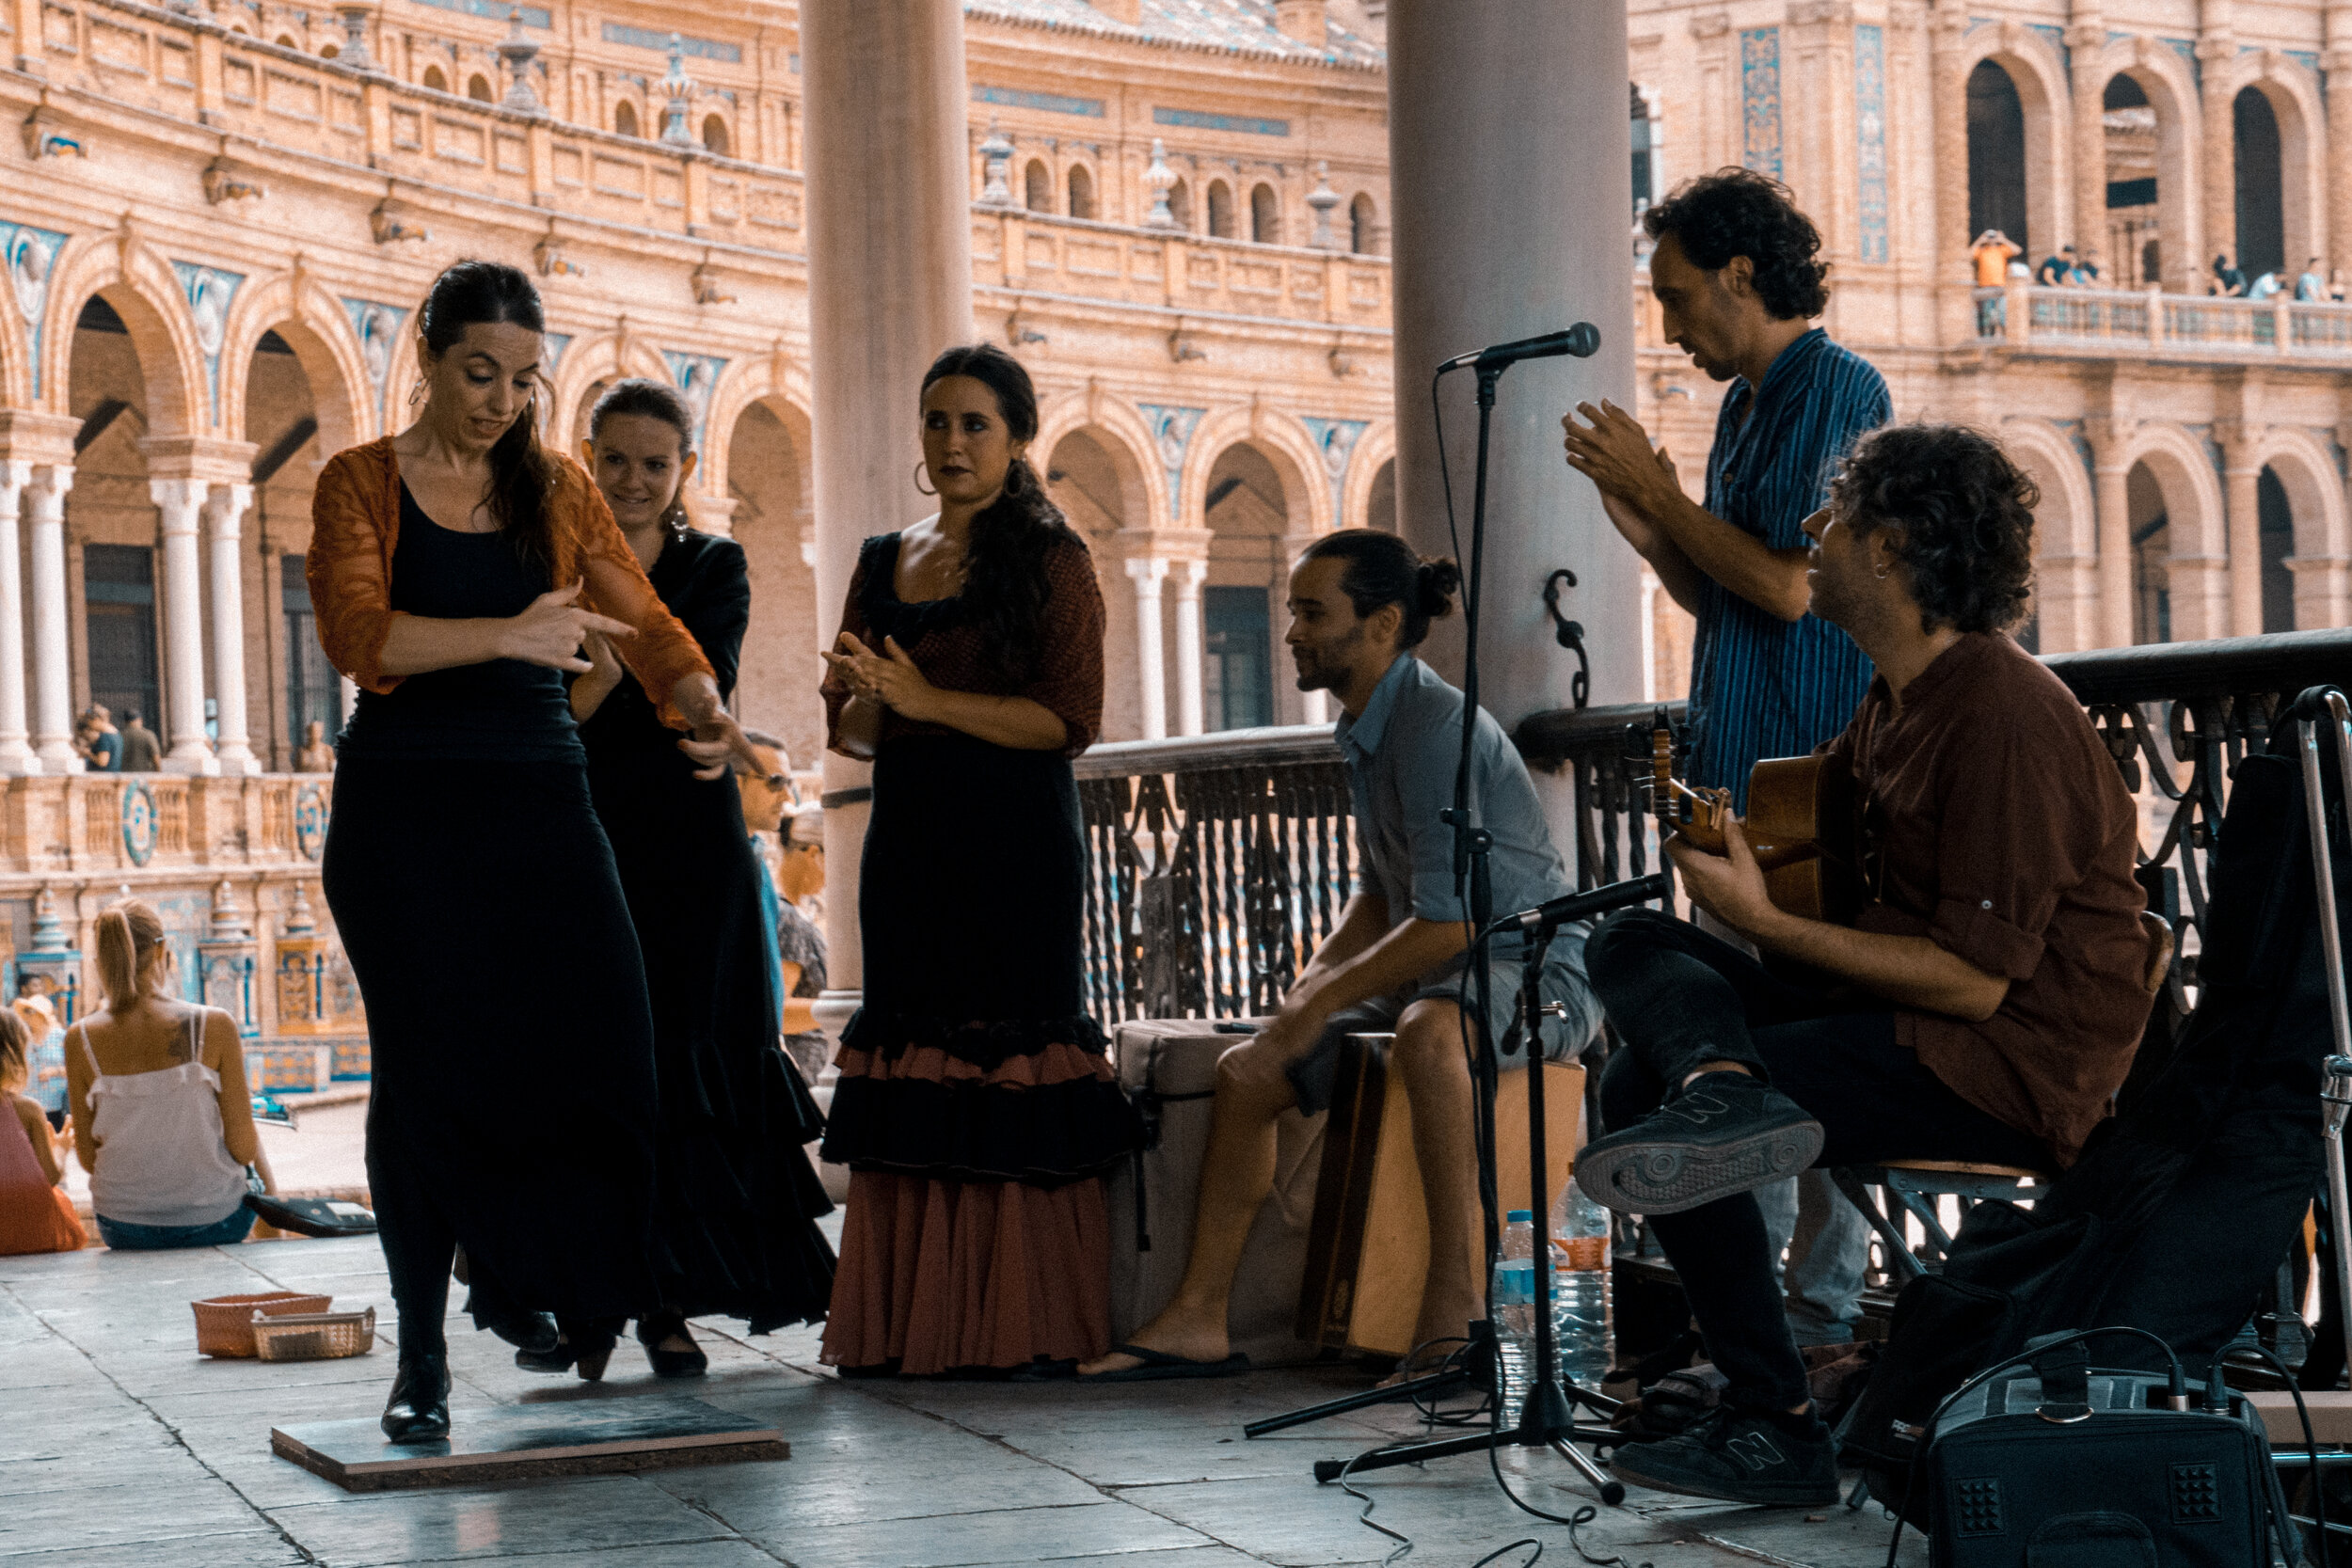  Take the train or fly to southern Spain for a weekend and discover Flamenco music and dance 